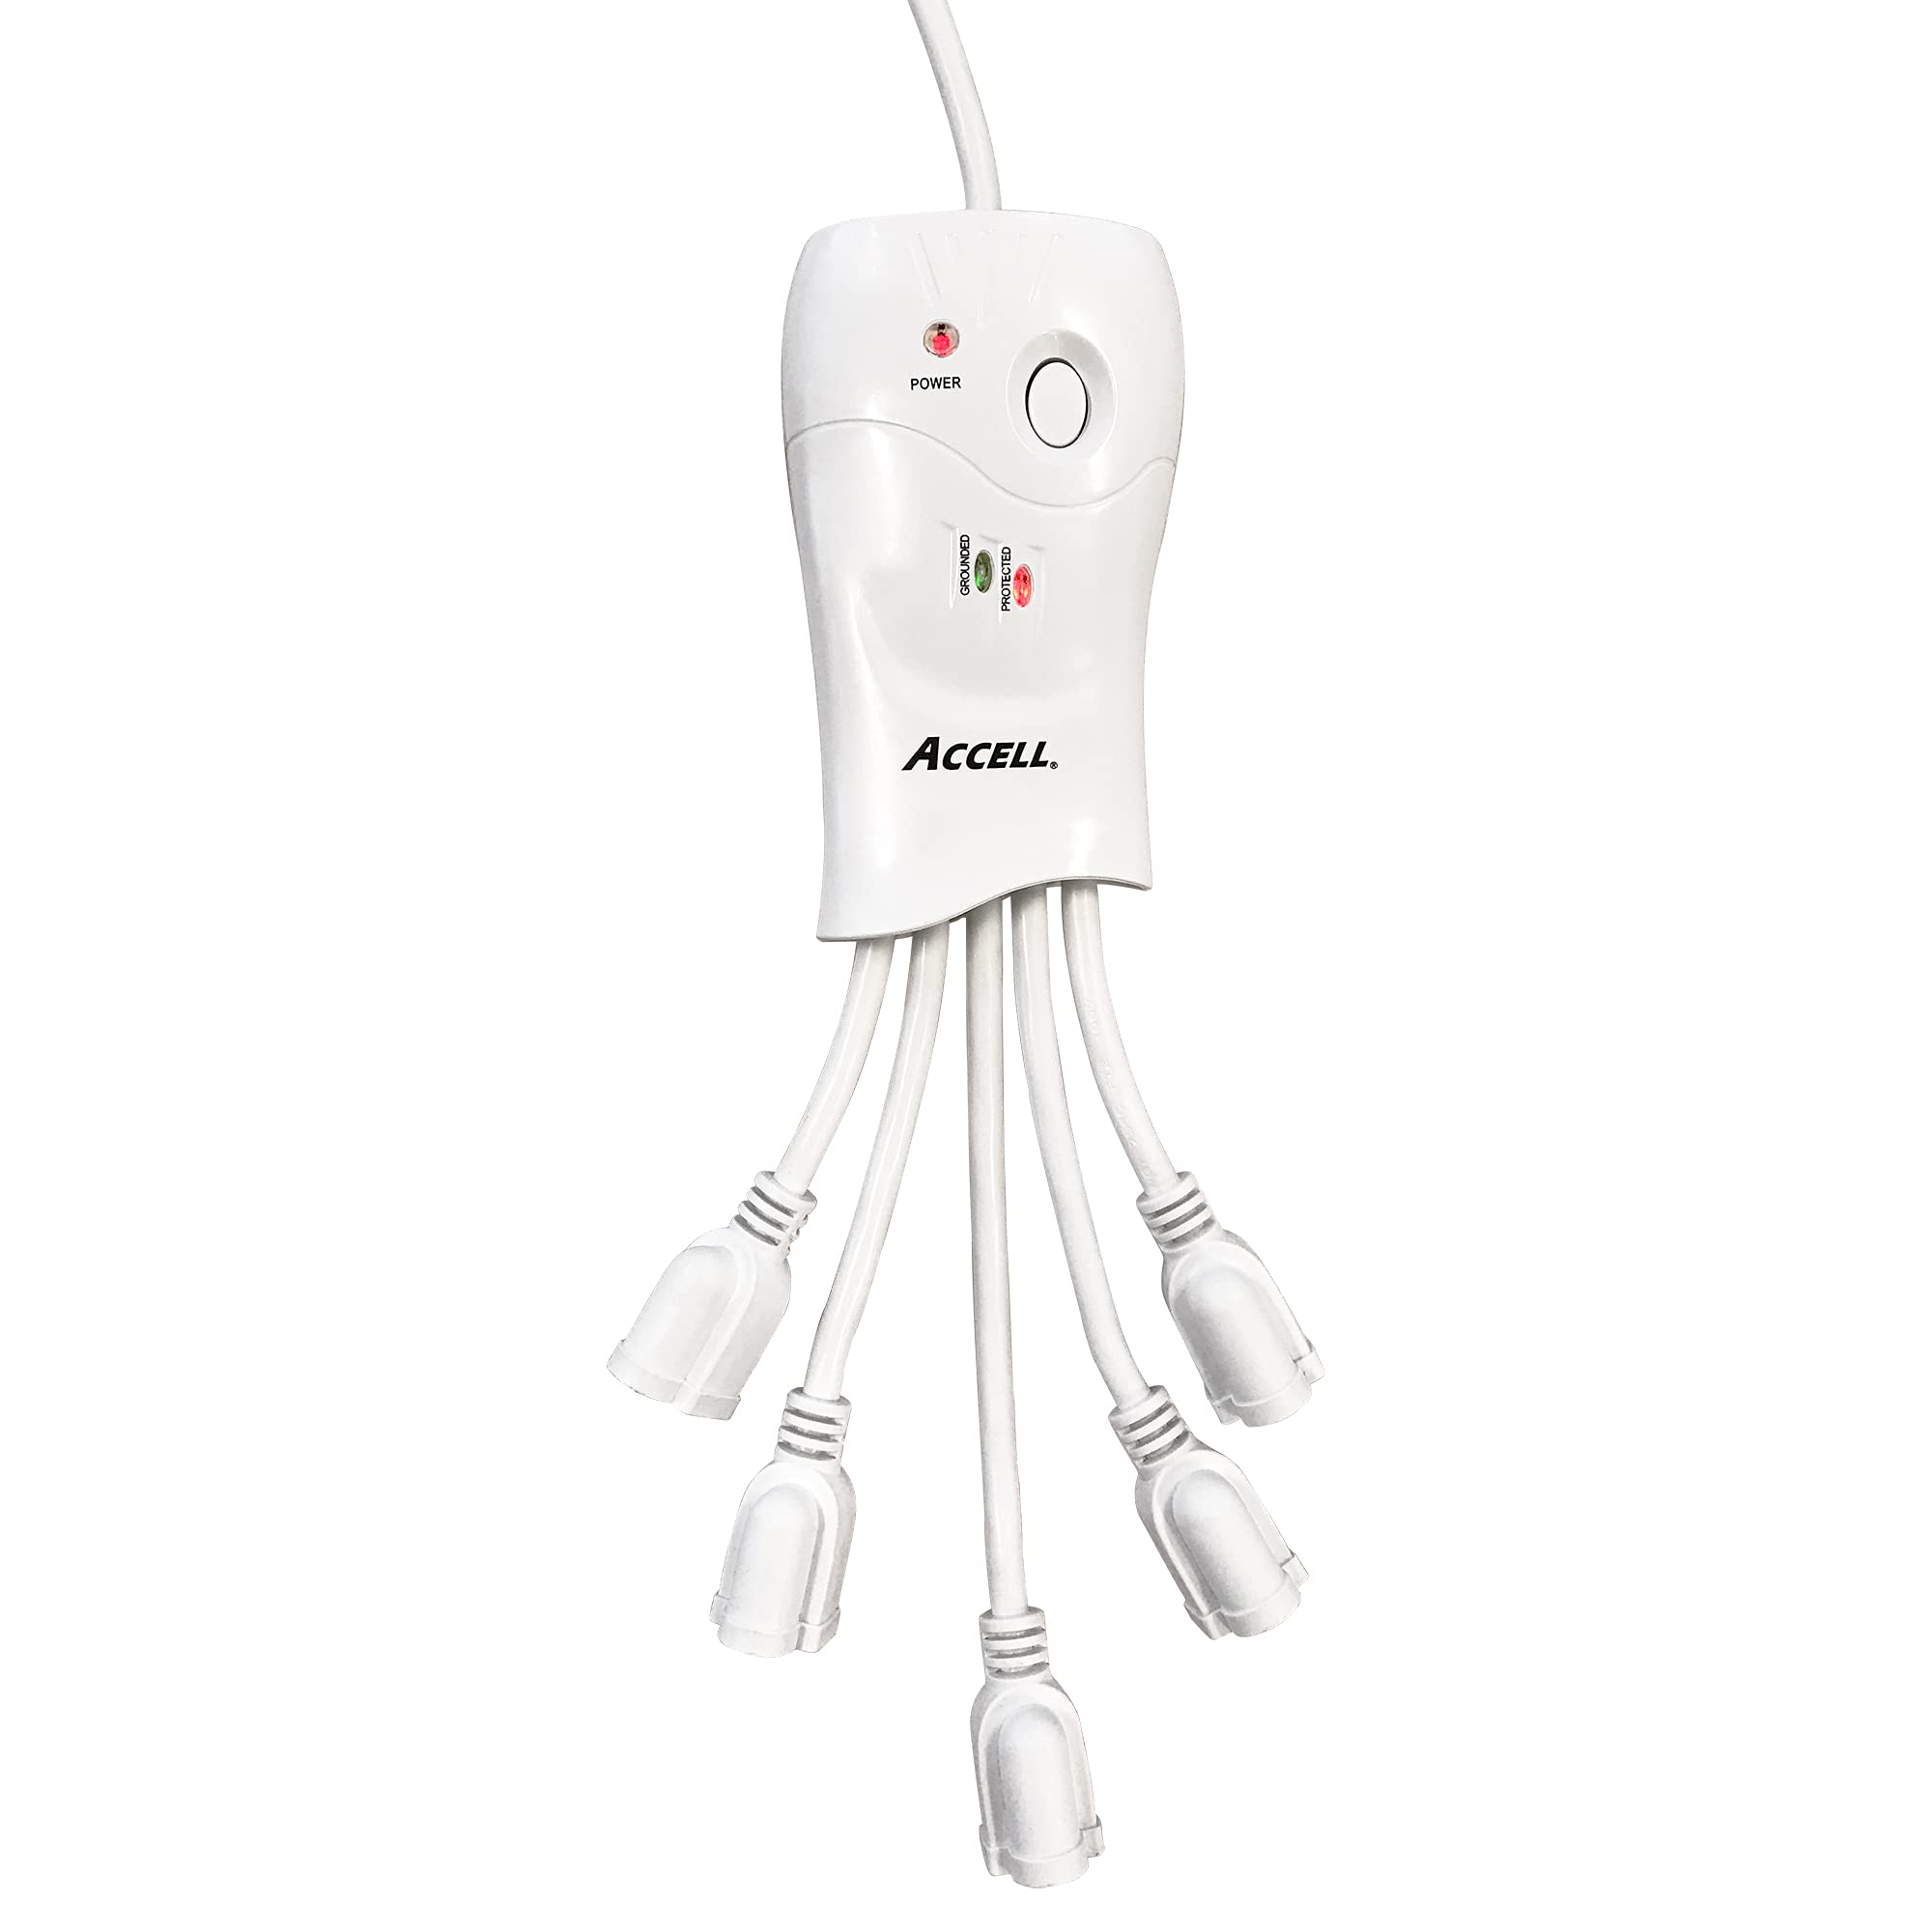 12 Best Squid Surge Protector for 2023